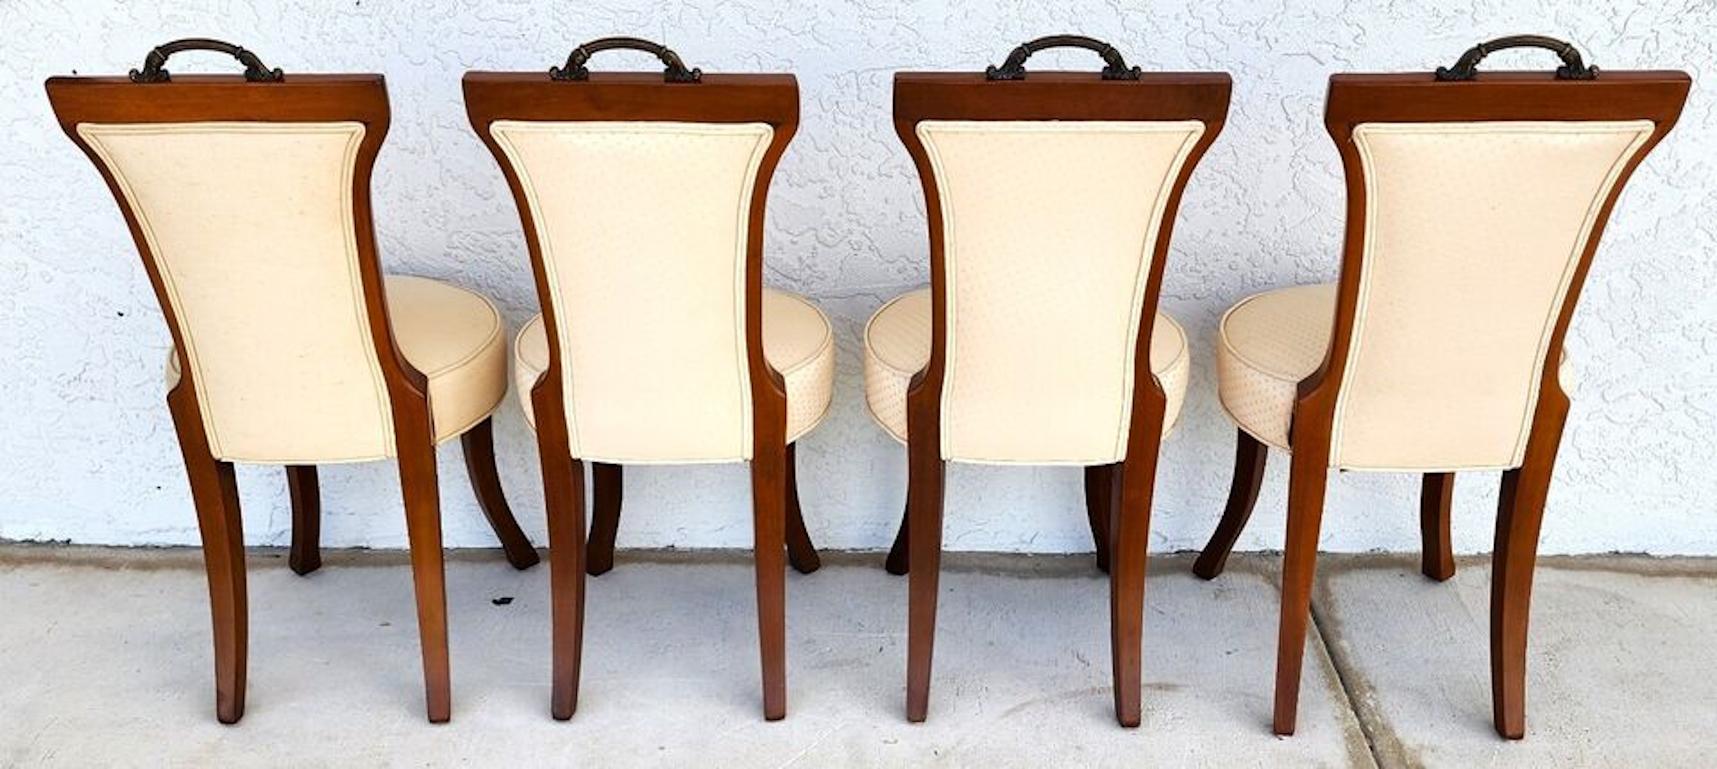 20th Century Antique Dining Chairs Set of 4 For Sale